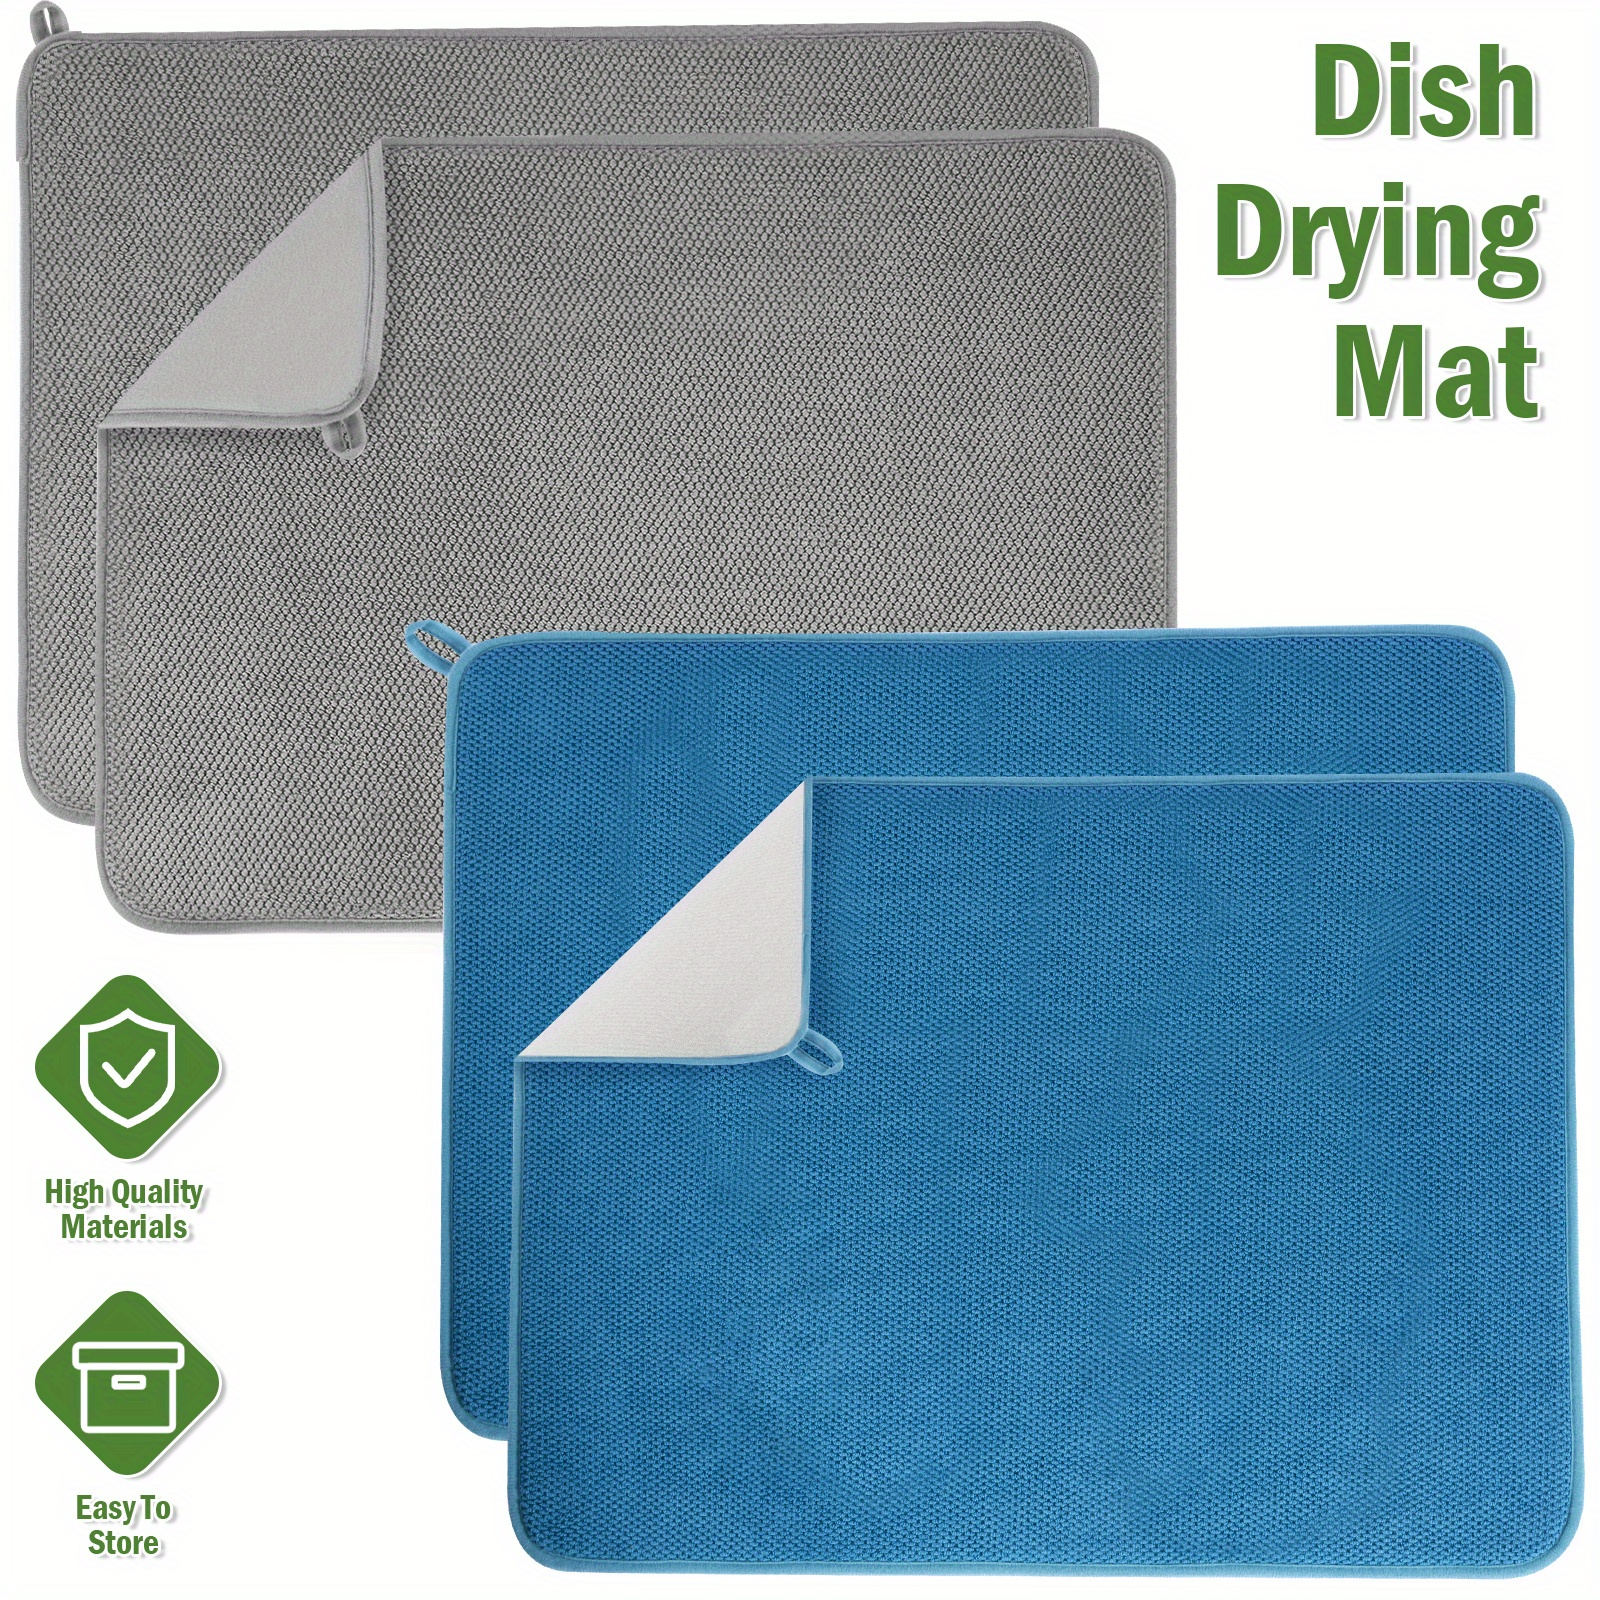 Dish Drying Mat for Kitchen Counter Pad Rack Mat Countertop Dishes, 16'' x  18'' Microfiber Dish Drying Mat Super Absorbent Dishware drying pad Drying